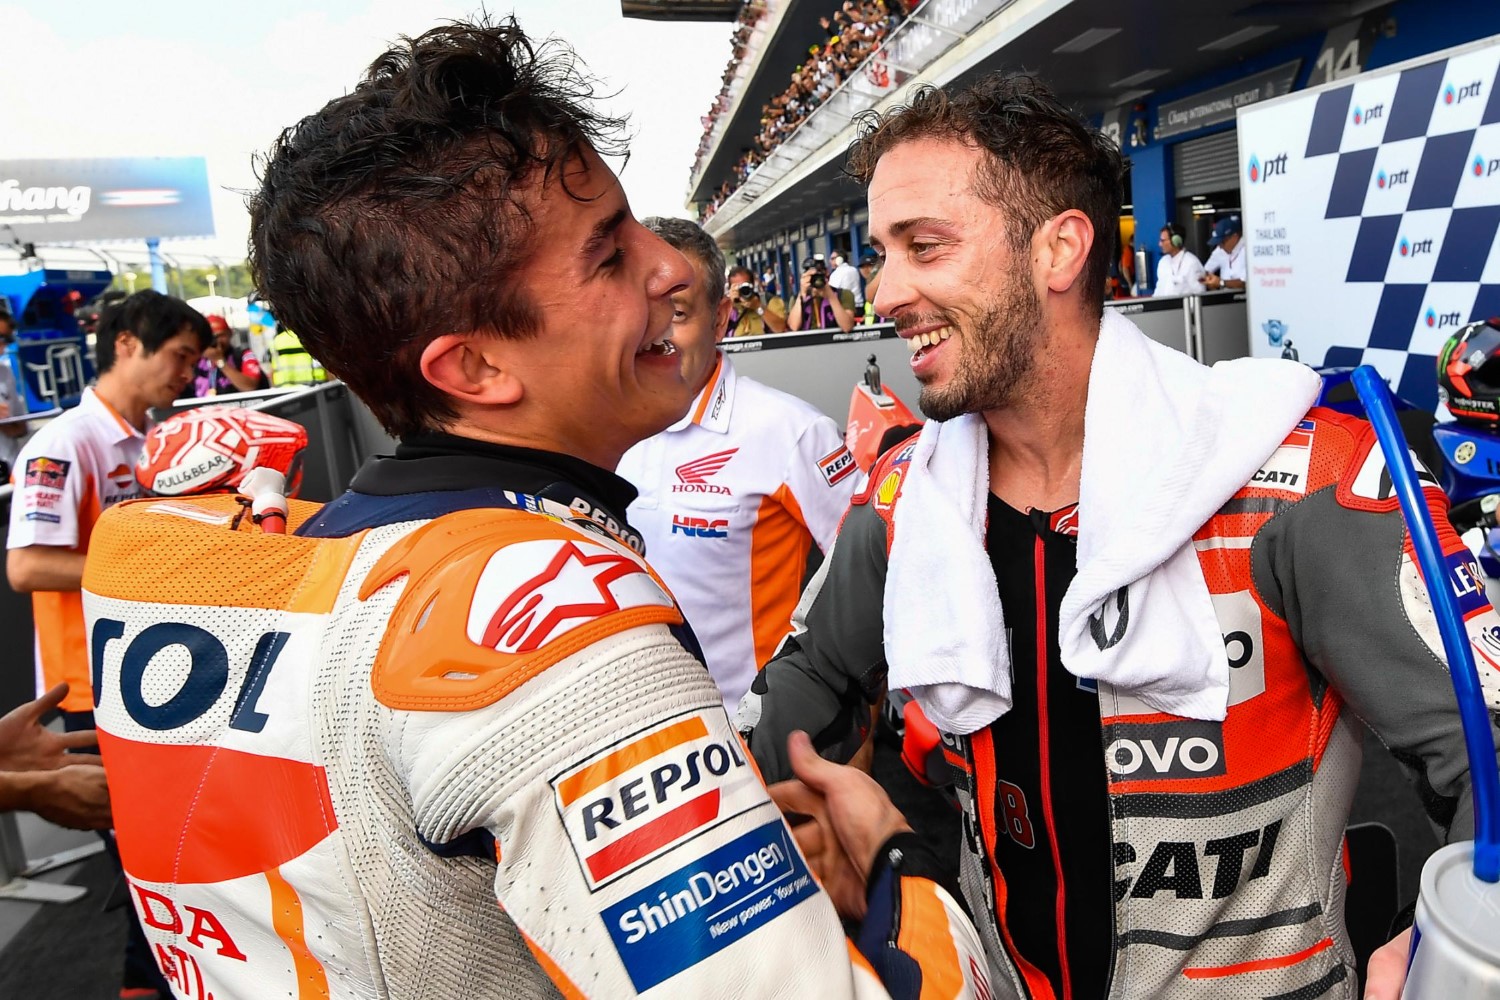 Marquez and Dovi congratulate each other